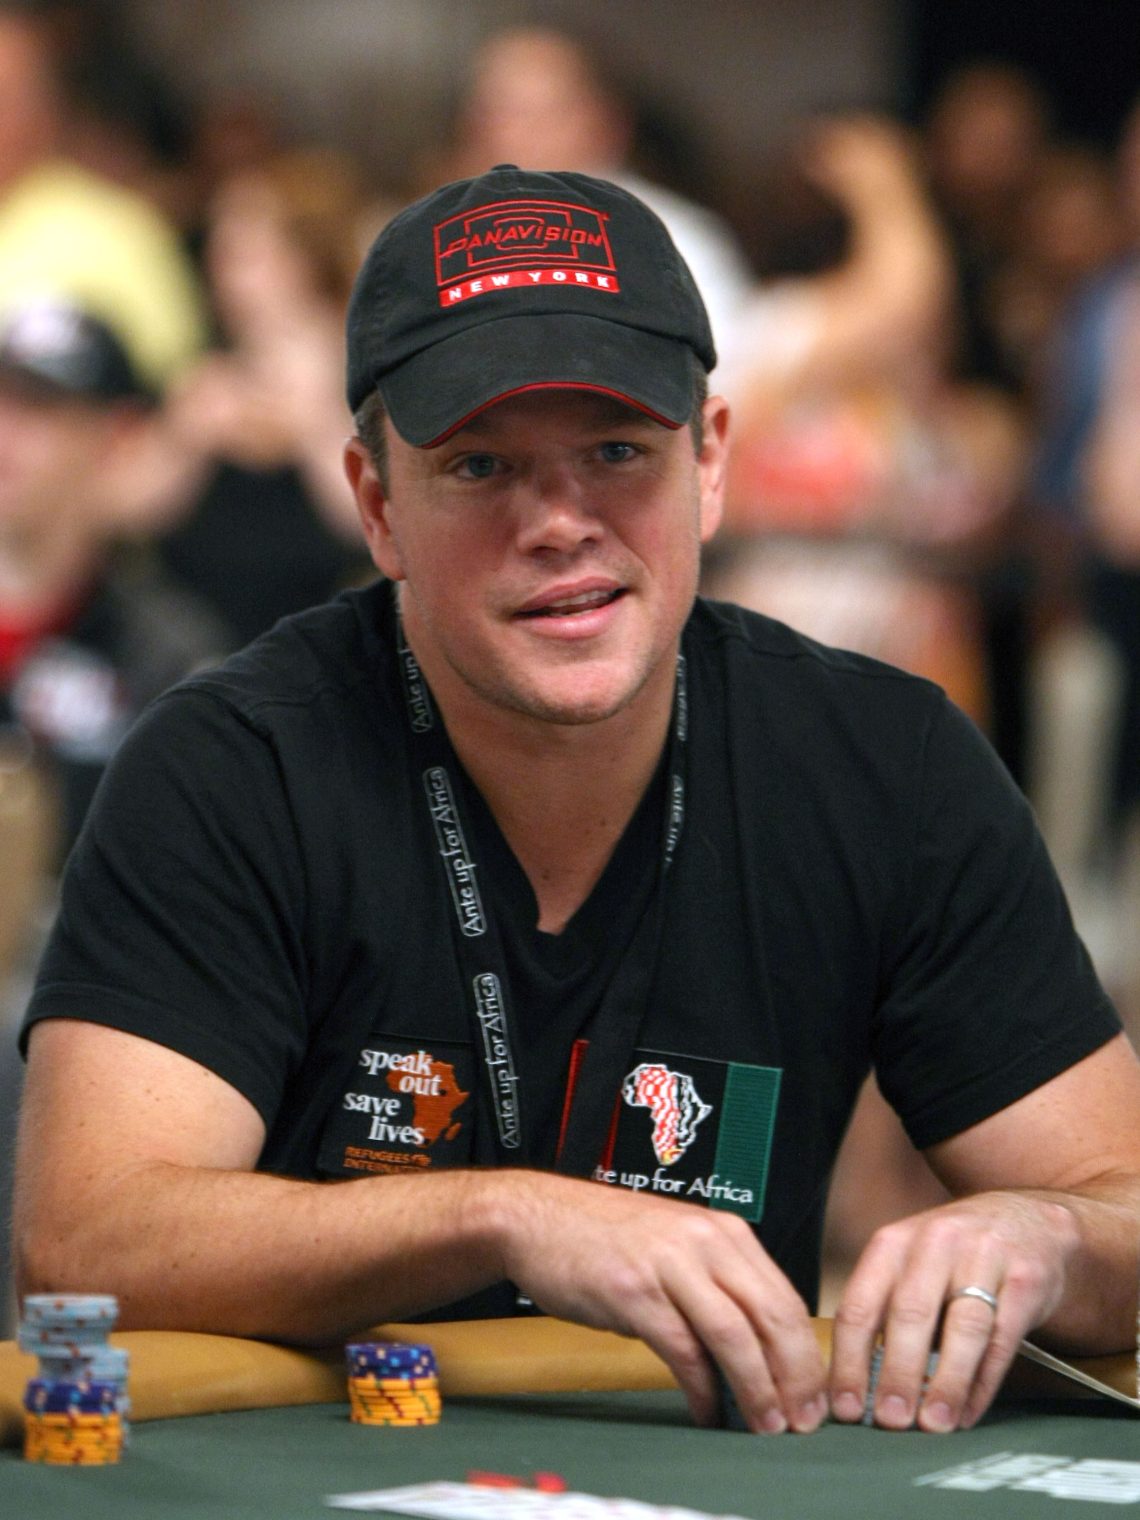 Matt Damon in attendance for 2010 Ante Up for Africa Celebrity Charity Poker Tournament, Rio All-Suite Hotel & Casino, Las Vegas, NV July 3, 2010. Photo By: MORA/Everett Collection